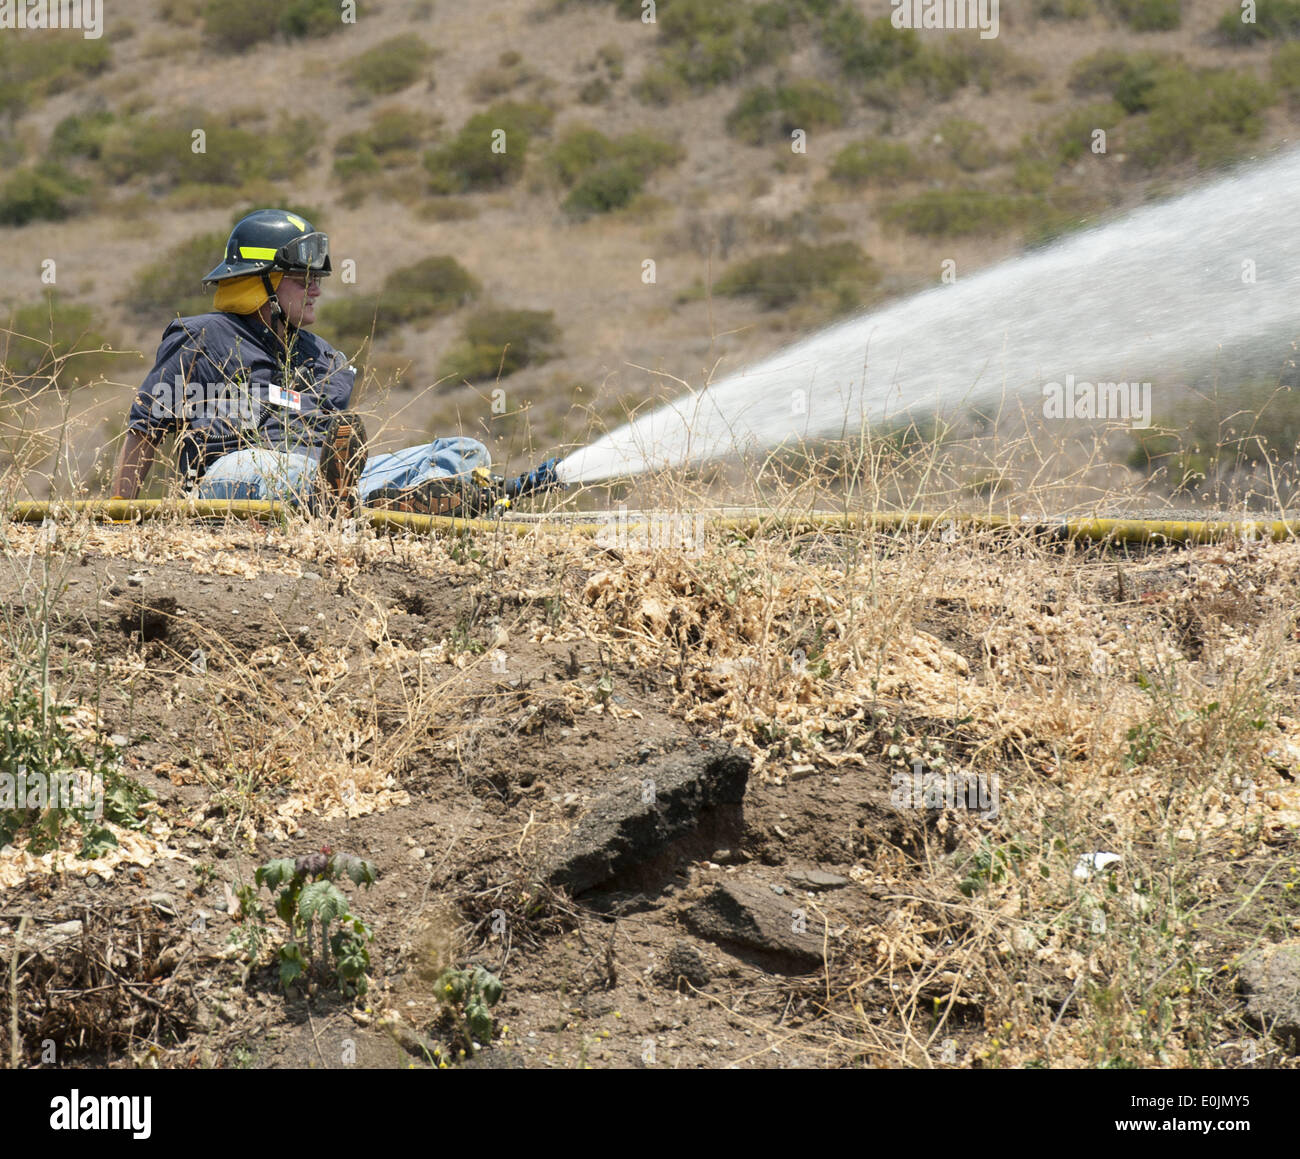 San Onofre, California, USA. 14th May, 2014. A San Onofre Nuclear Generating Station Fire Brigade member uses a fire hose to wet down surrounding vegetation on Wednesday morning. Multiple Fire agencies, including Federal, State and County, responded to a wildfire on at the San Clemente Check Point that began when a truck on the northbound I-5 Freeway caught fire and passed to nearby vegetation on Wednesday morning. The Pendleton West Fire, had north and south bound trafficstopped, along with Amtrak Passenger Train traffic, as firefighters fought to contain the 150 plus acre fire that include Stock Photo